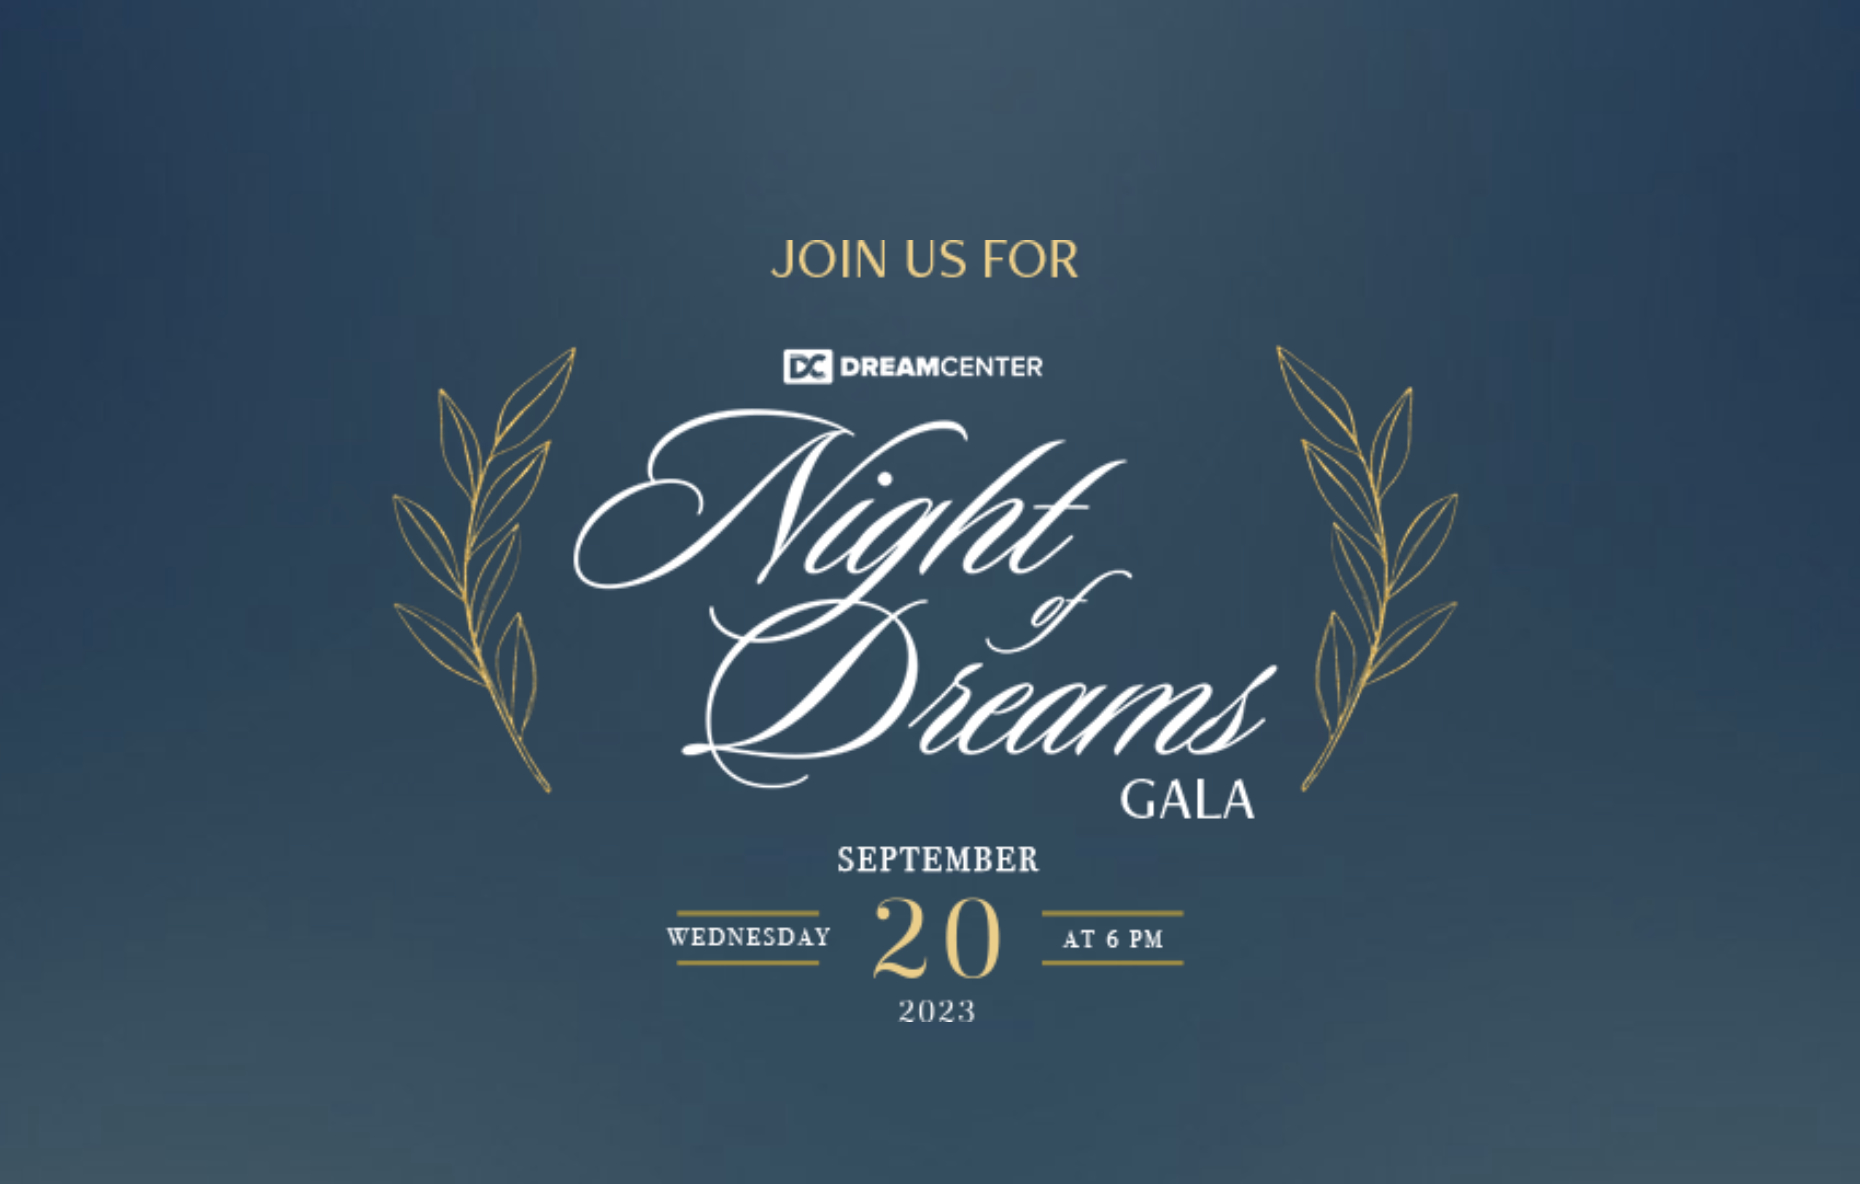 Los Angeles Dream Center to host annual ‘Night of Dreams,’ reflecting on 29 years of service to the community.